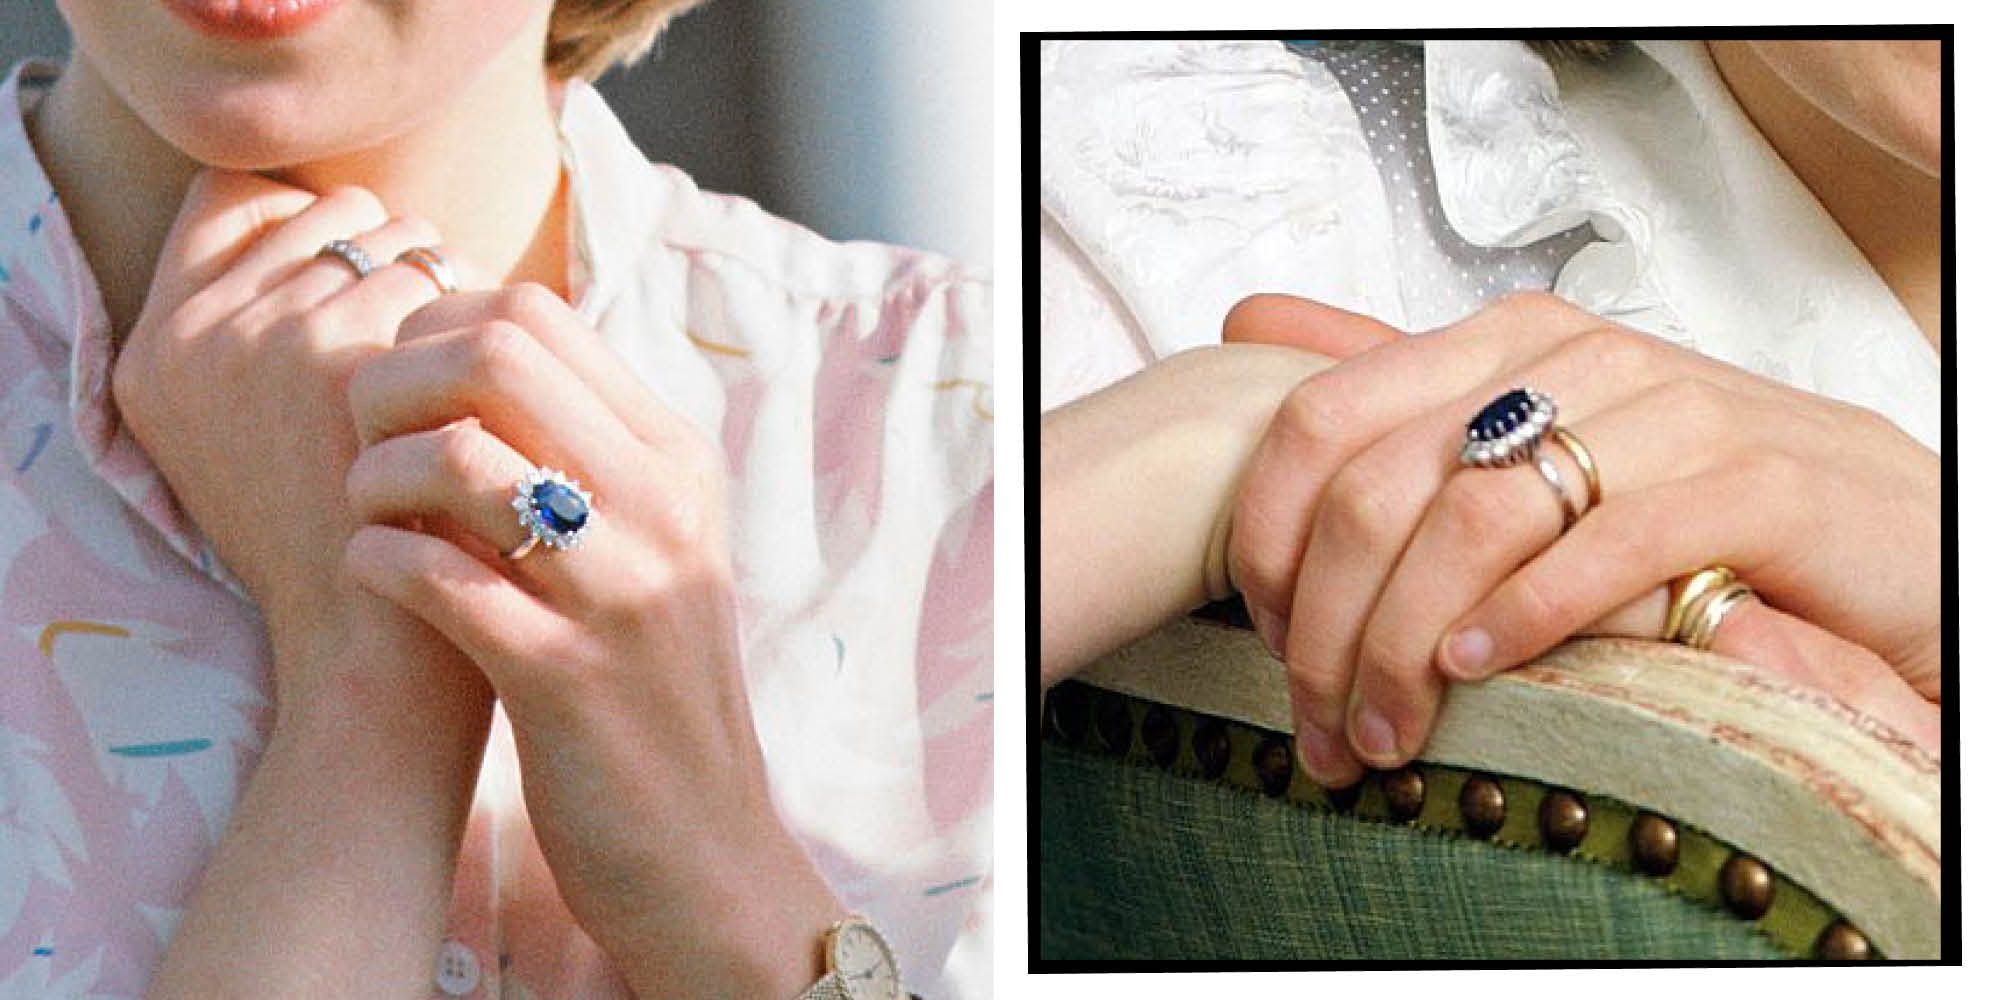 What does Kate Middleton's wedding ring look like? - Quora